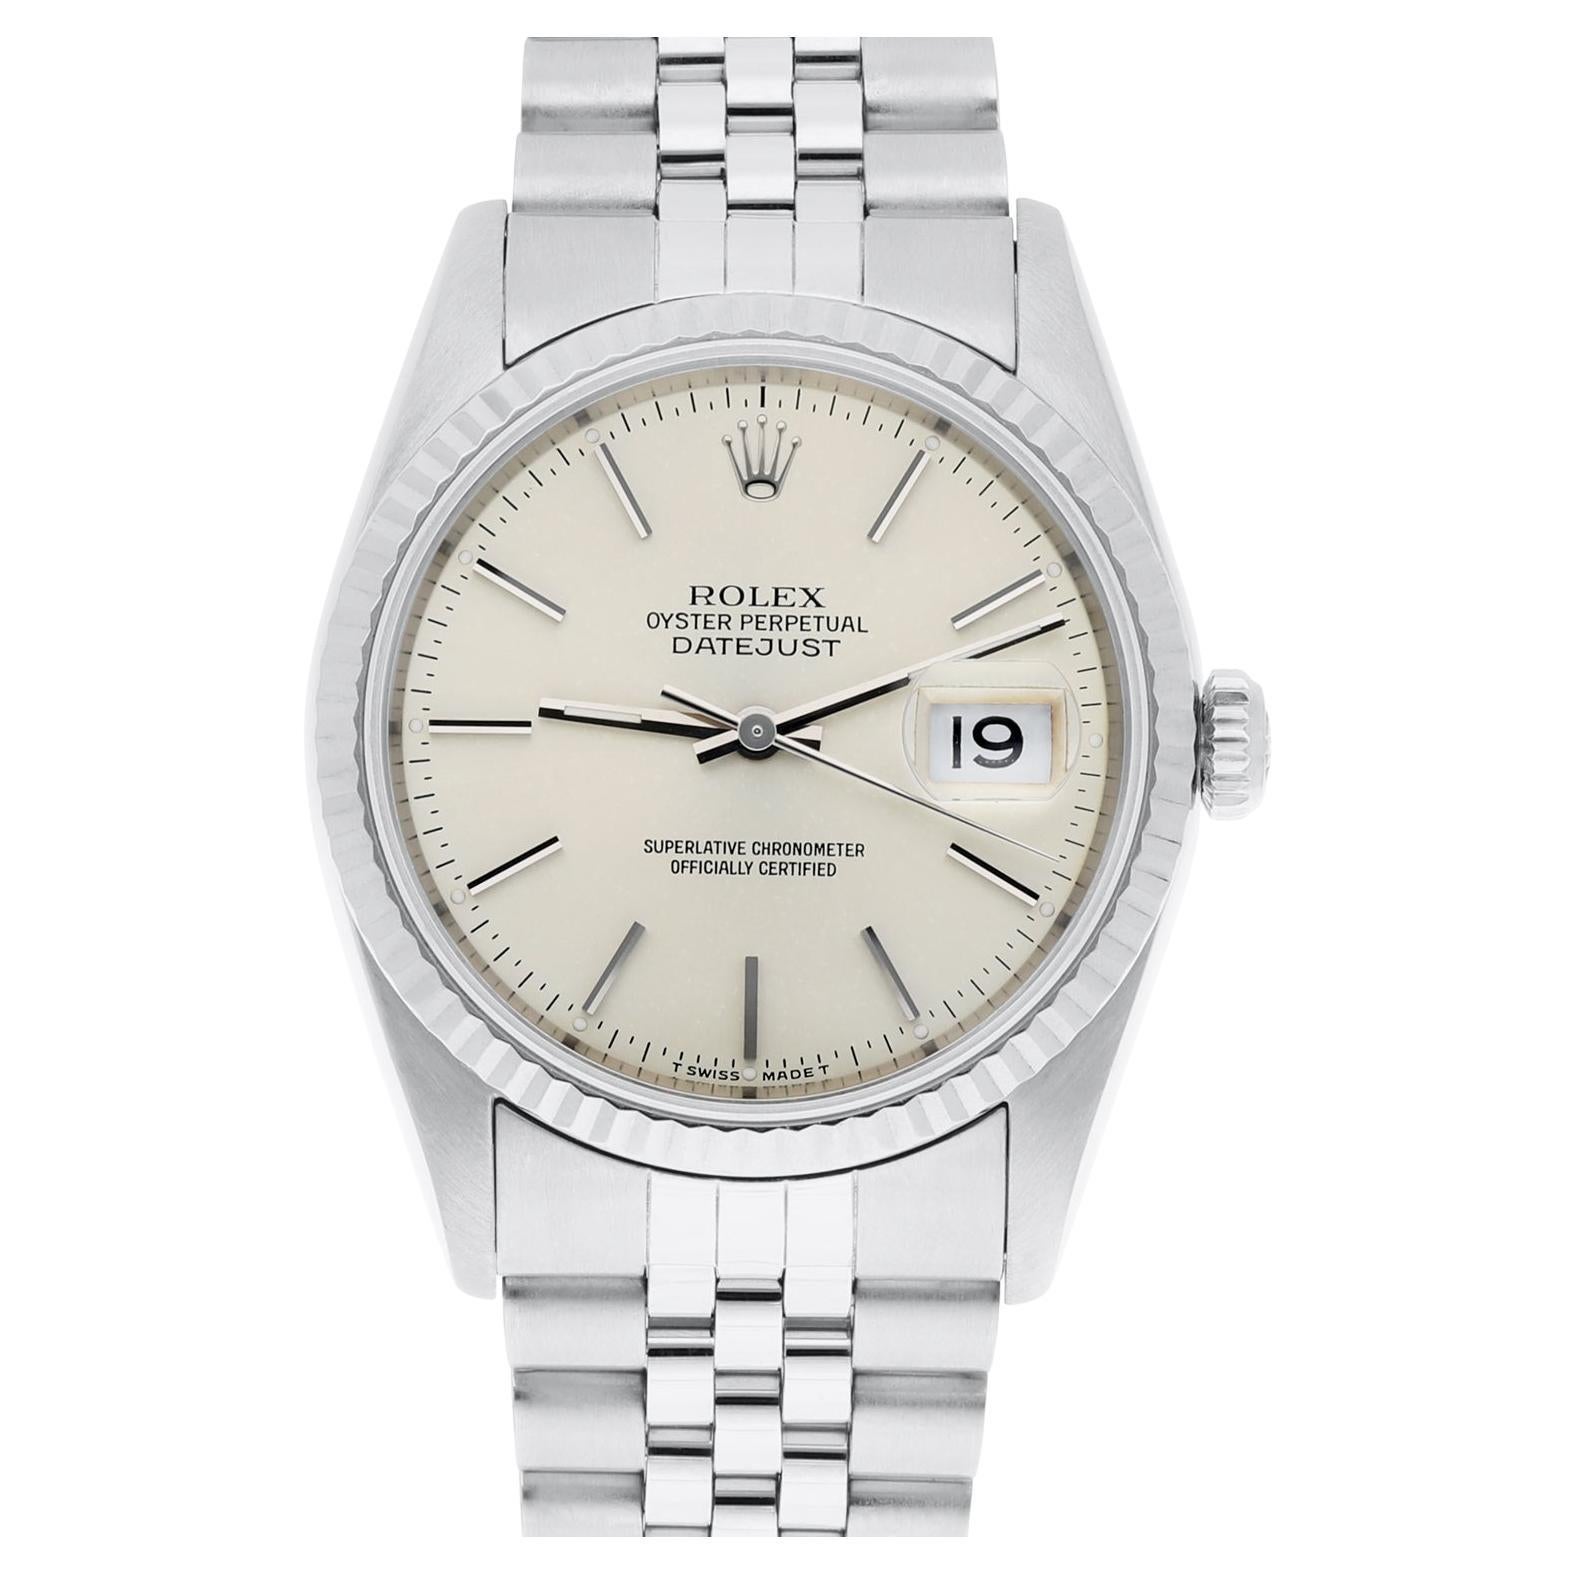 Rolex Datejust 36mm Stainless Steel 16234 Silver Dial, Jubilee Circa 1994 For Sale